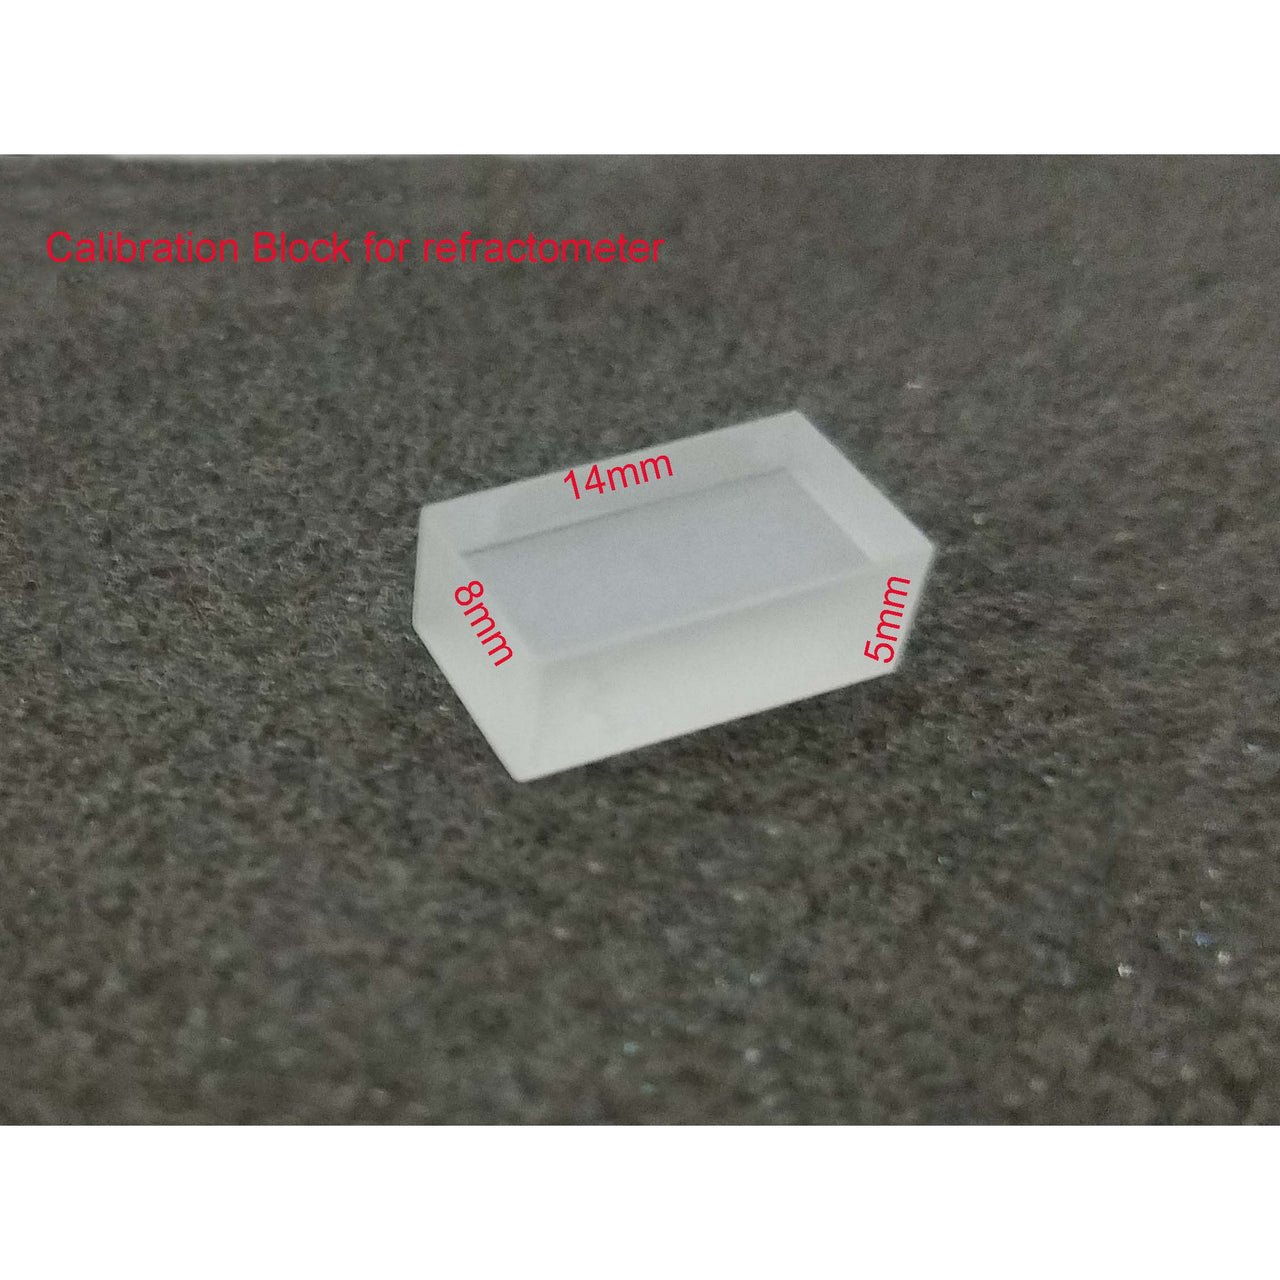 Calibration Block for Azzota Portable Refractometers 8mm*14mm*5mm